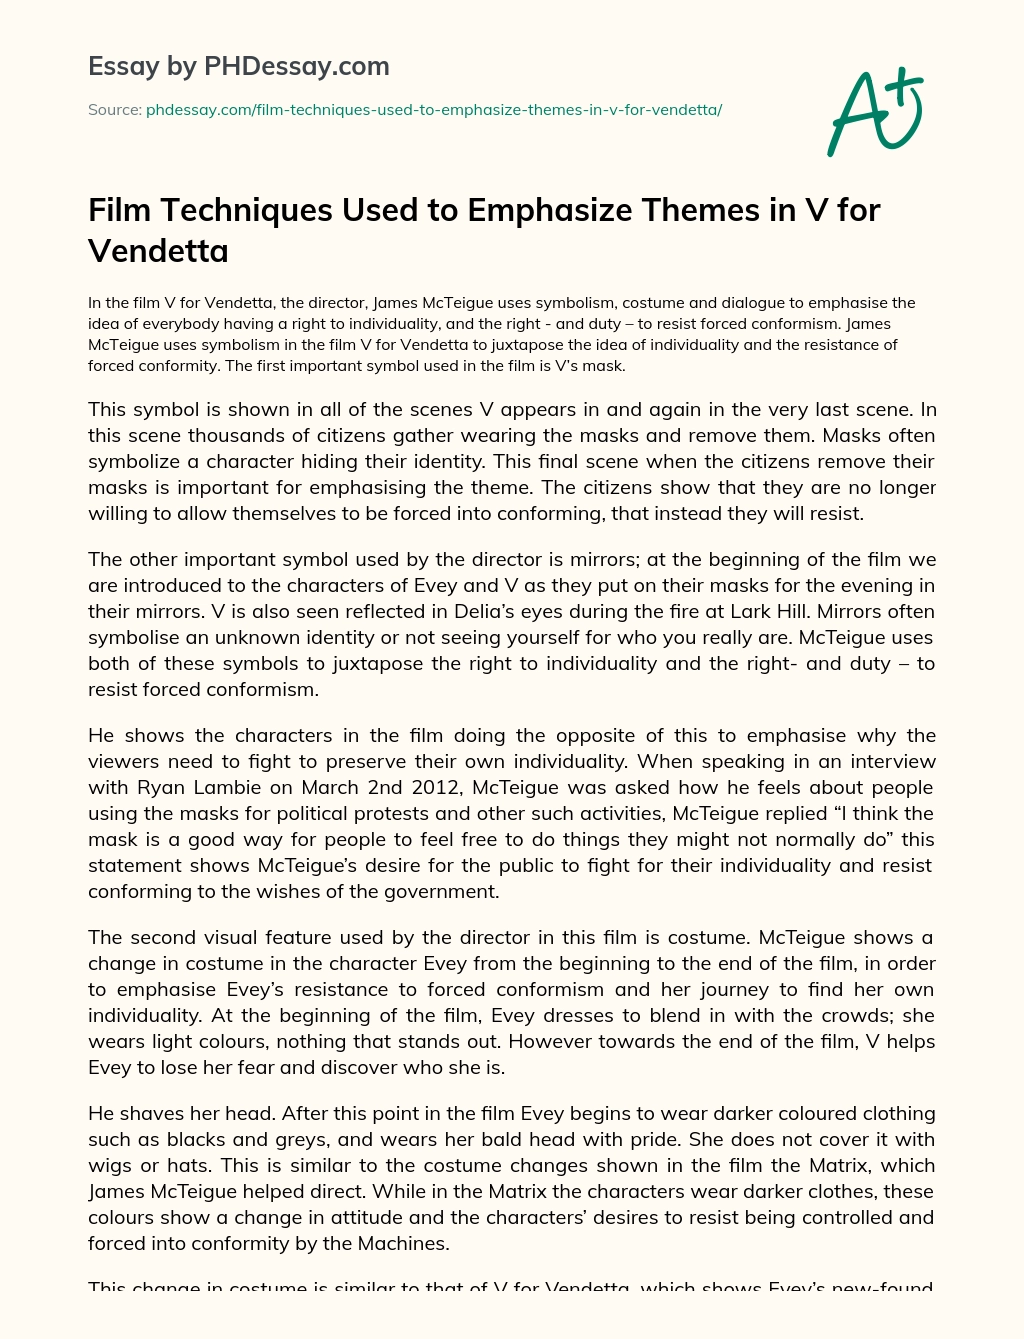 Film Techniques Used to Emphasize Themes in V for Vendetta essay